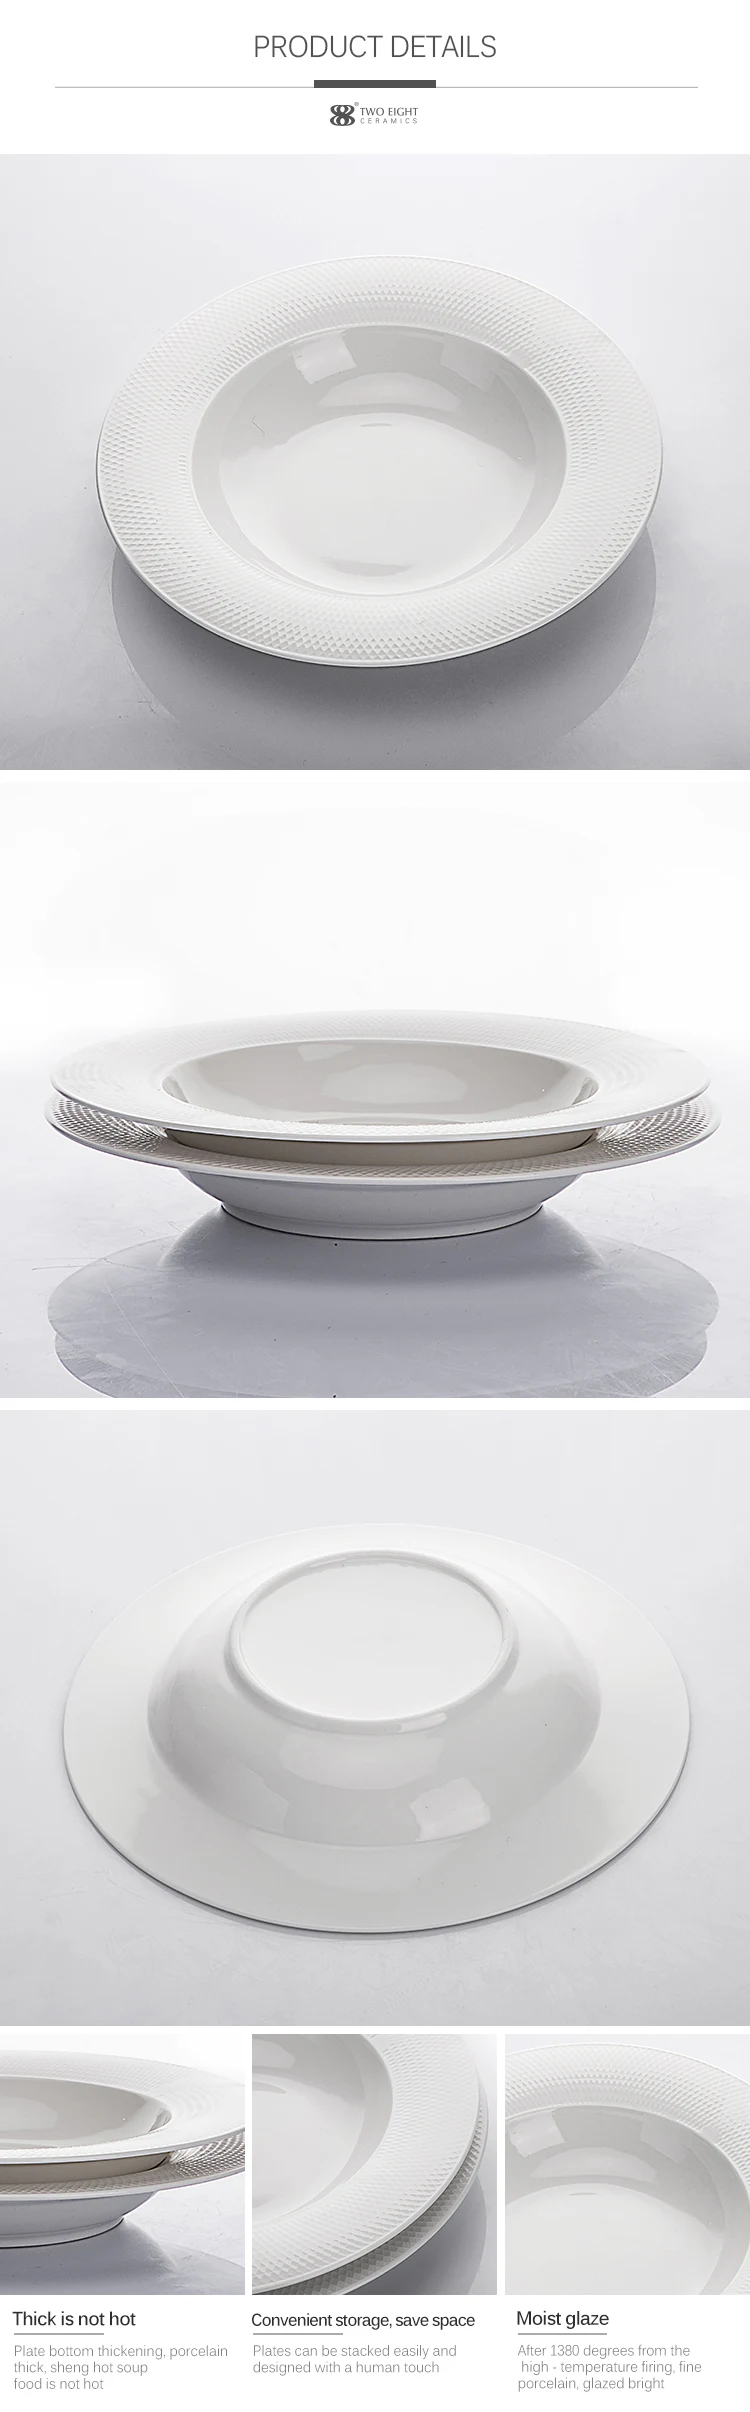 Outdoor lifestyle Restaurant Tableware Table Soup Bowl, Grid Style China Porcelain Soup Plate Round Plate^